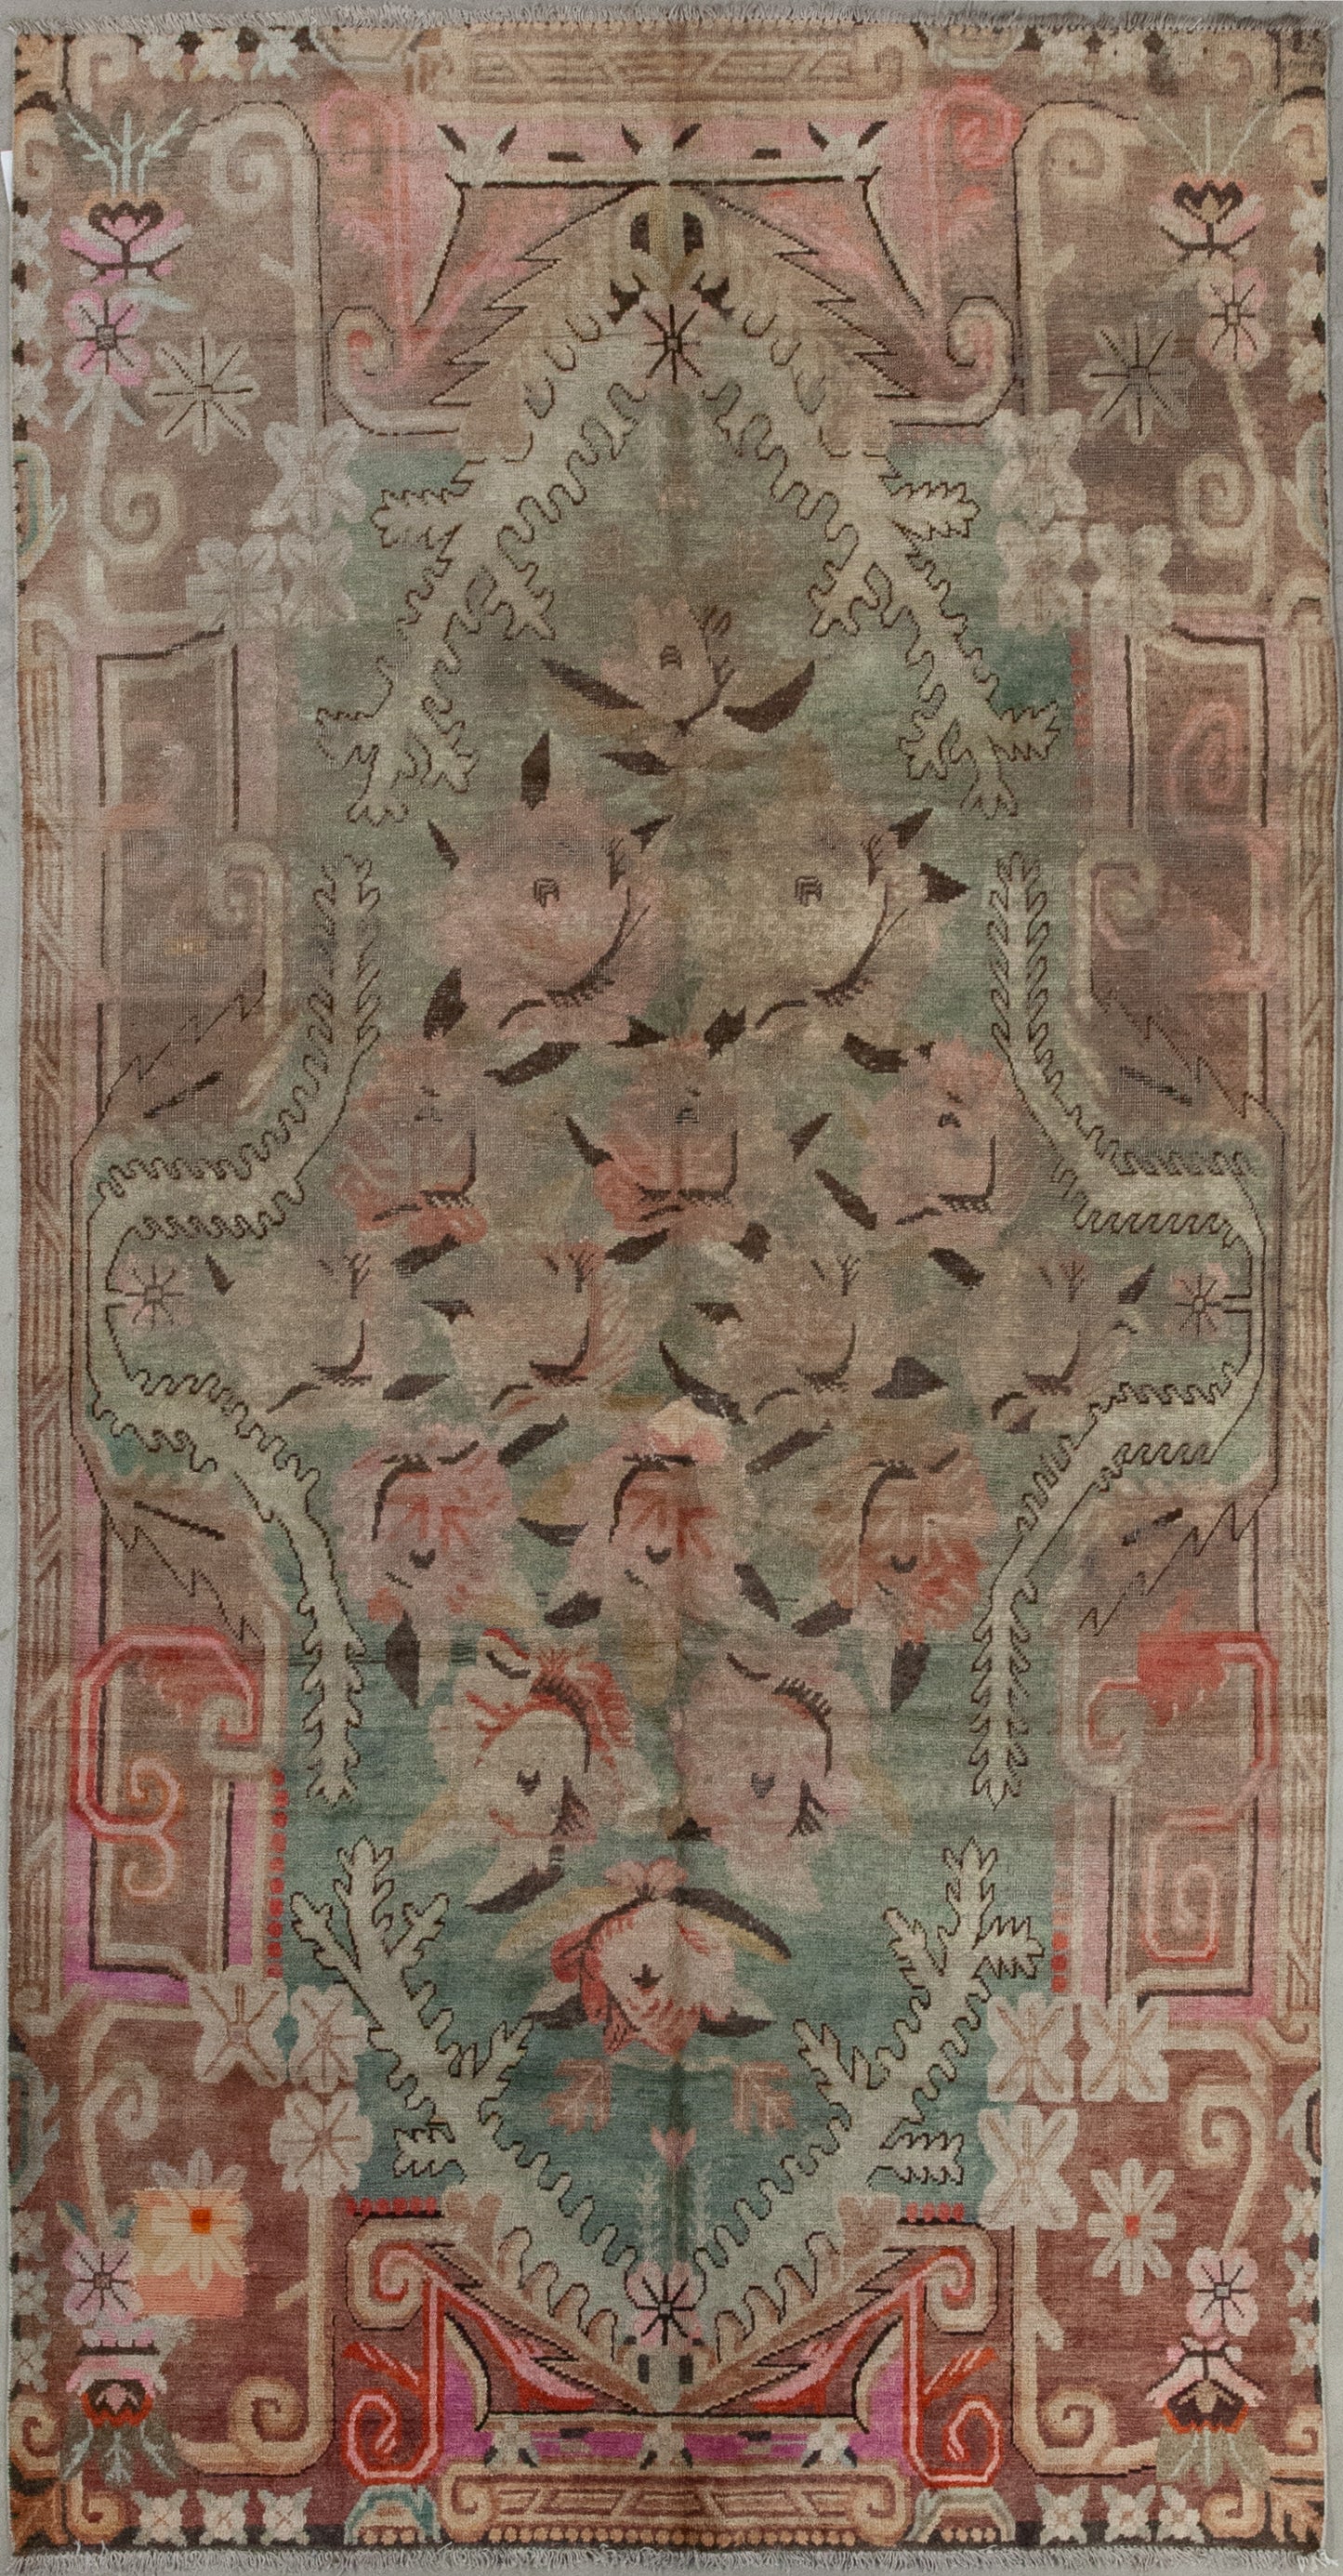 This distinctive carpet was woven to represent a roses garden in an abstract manner. The color scheme comes with dusty greenish for the central background, pink for the main artwork, brown for the contour, and black and white to create contrast.